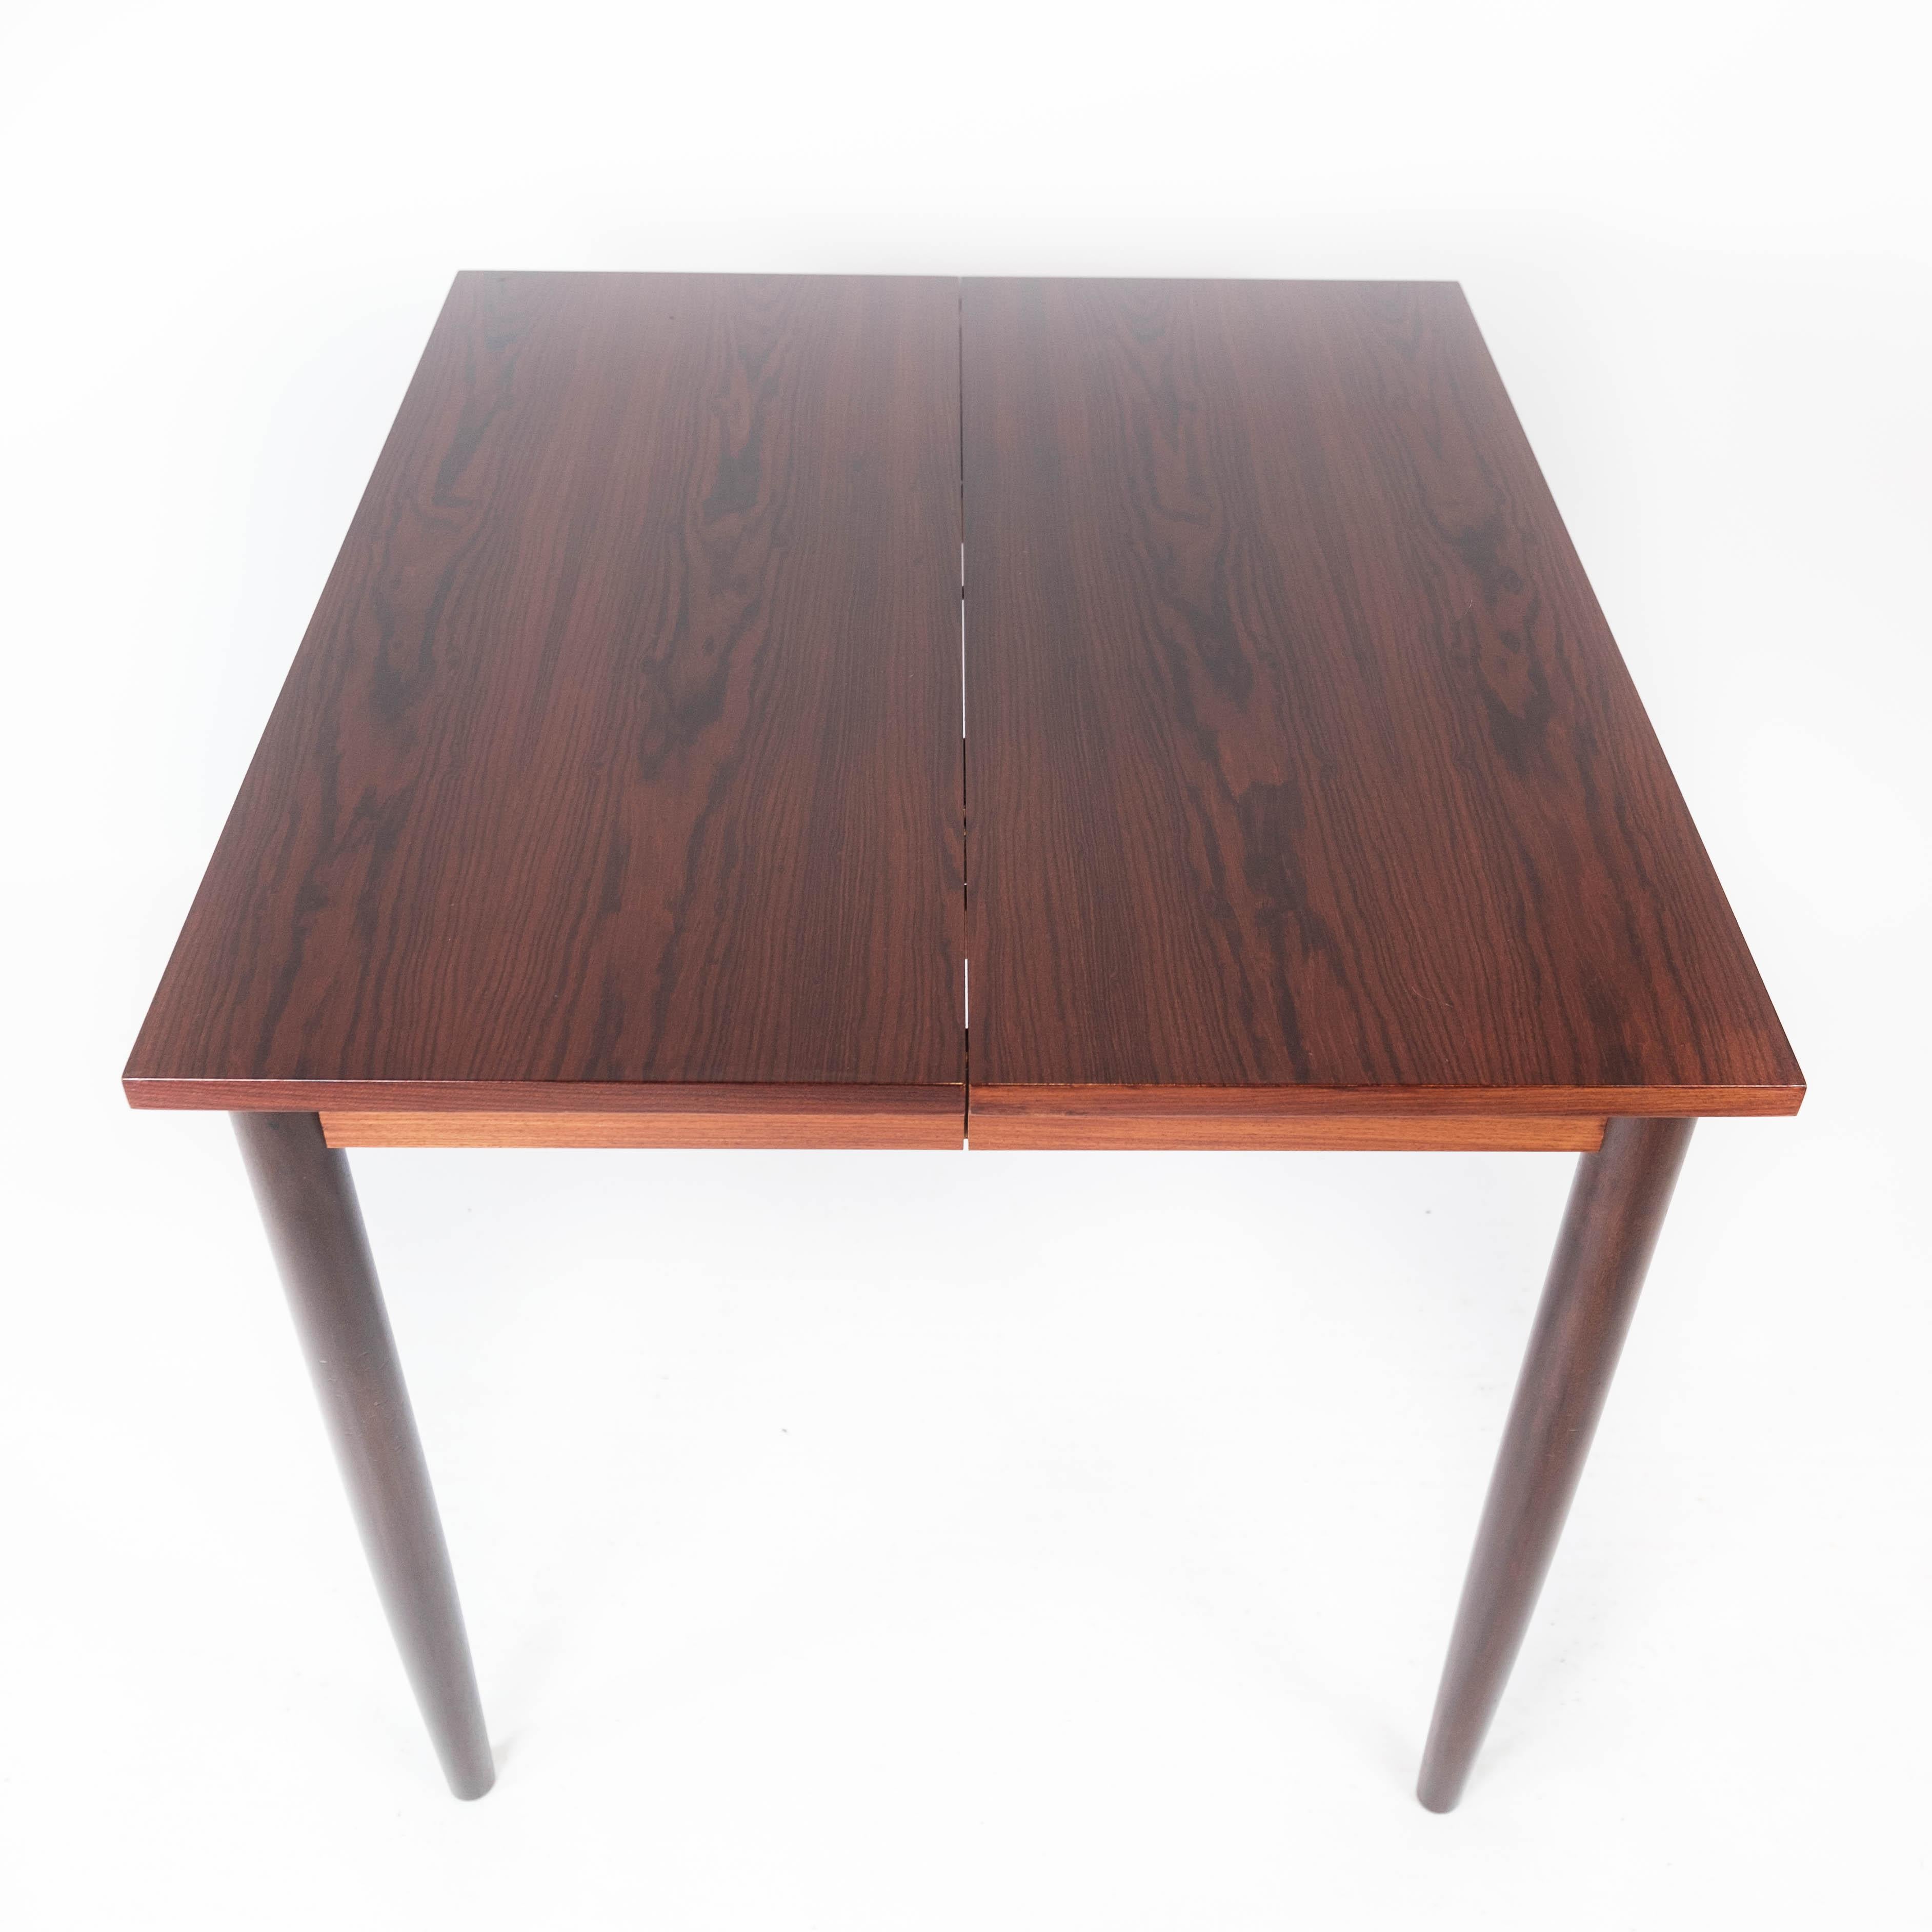 Mid-Century Modern Dining Table Made In Rosewood With Extension Plates By Arne Vodder From 1960s For Sale